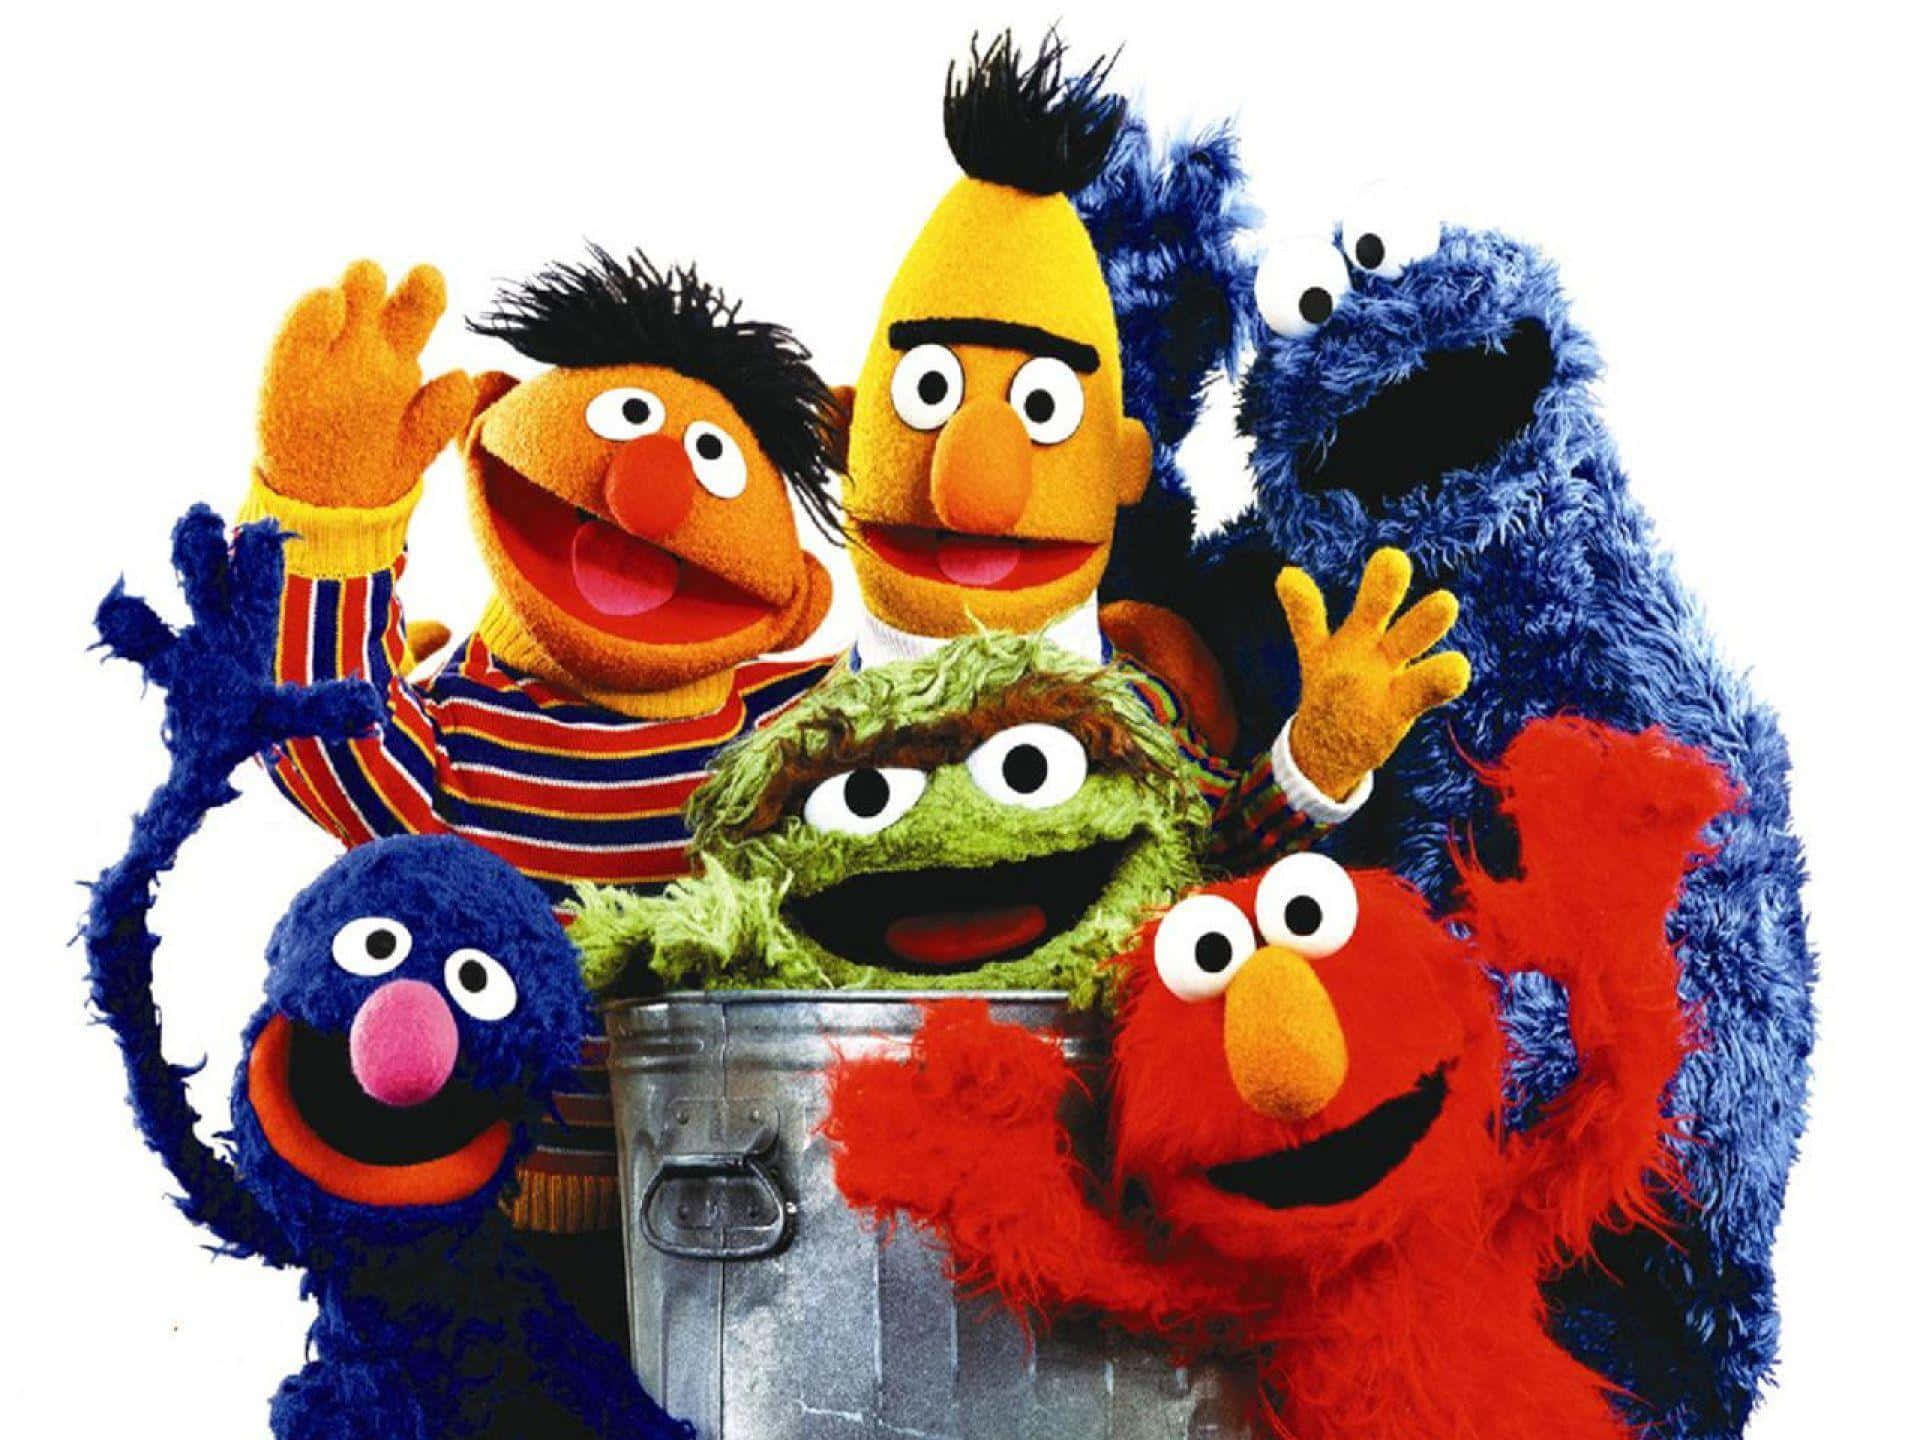 Follow Sesame Street to Enter a World of Fun, Laughter and Learning